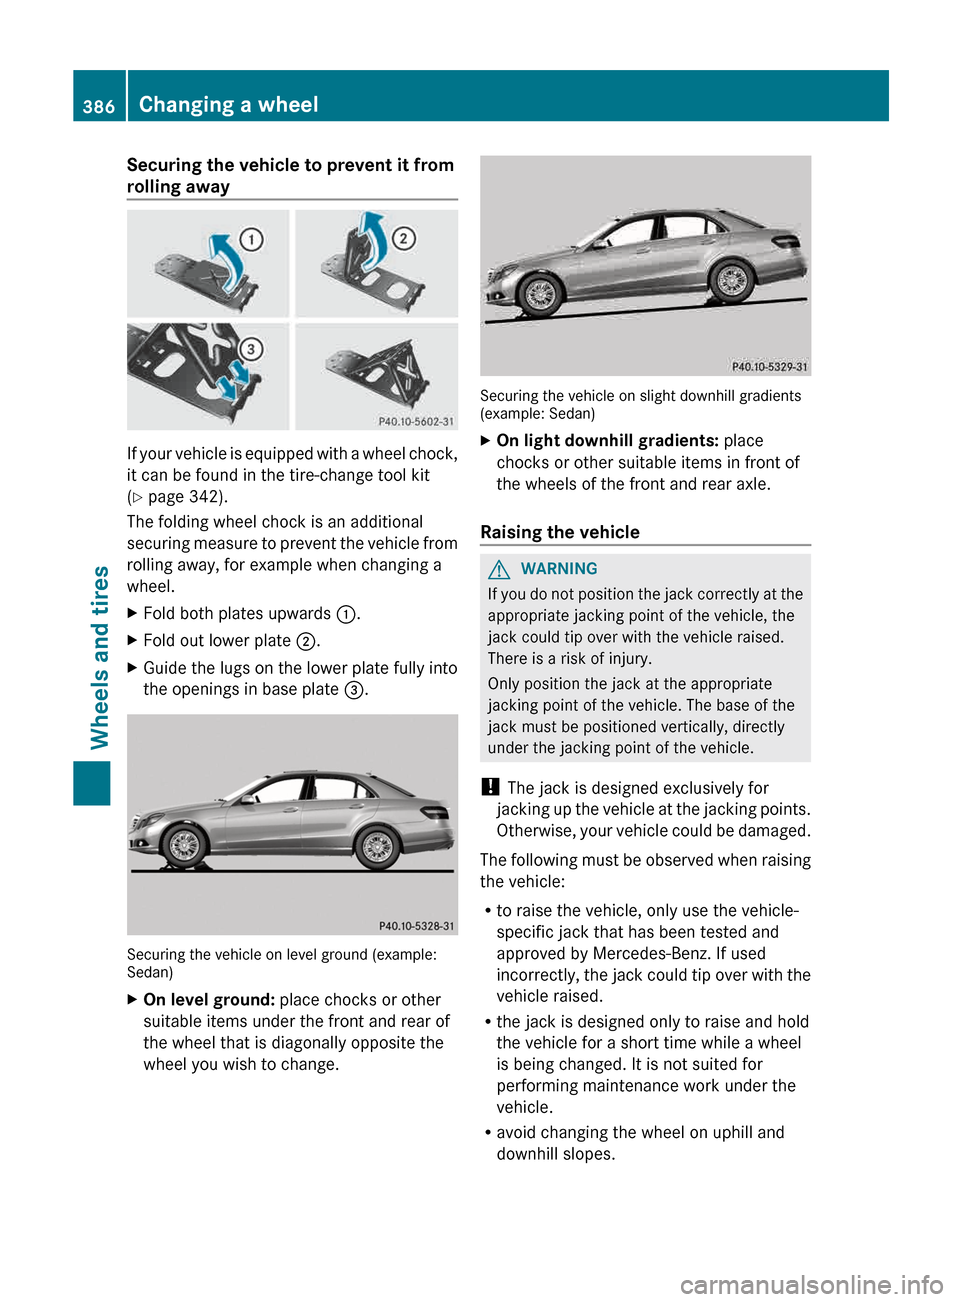 MERCEDES-BENZ E-Class SEDAN 2013 W212 Owners Guide Securing the vehicle to prevent it from
rolling away
If your vehicle is equipped with a wheel chock,
it can be found in the tire-change tool kit
(Y page 342).
The folding wheel chock is an additional
